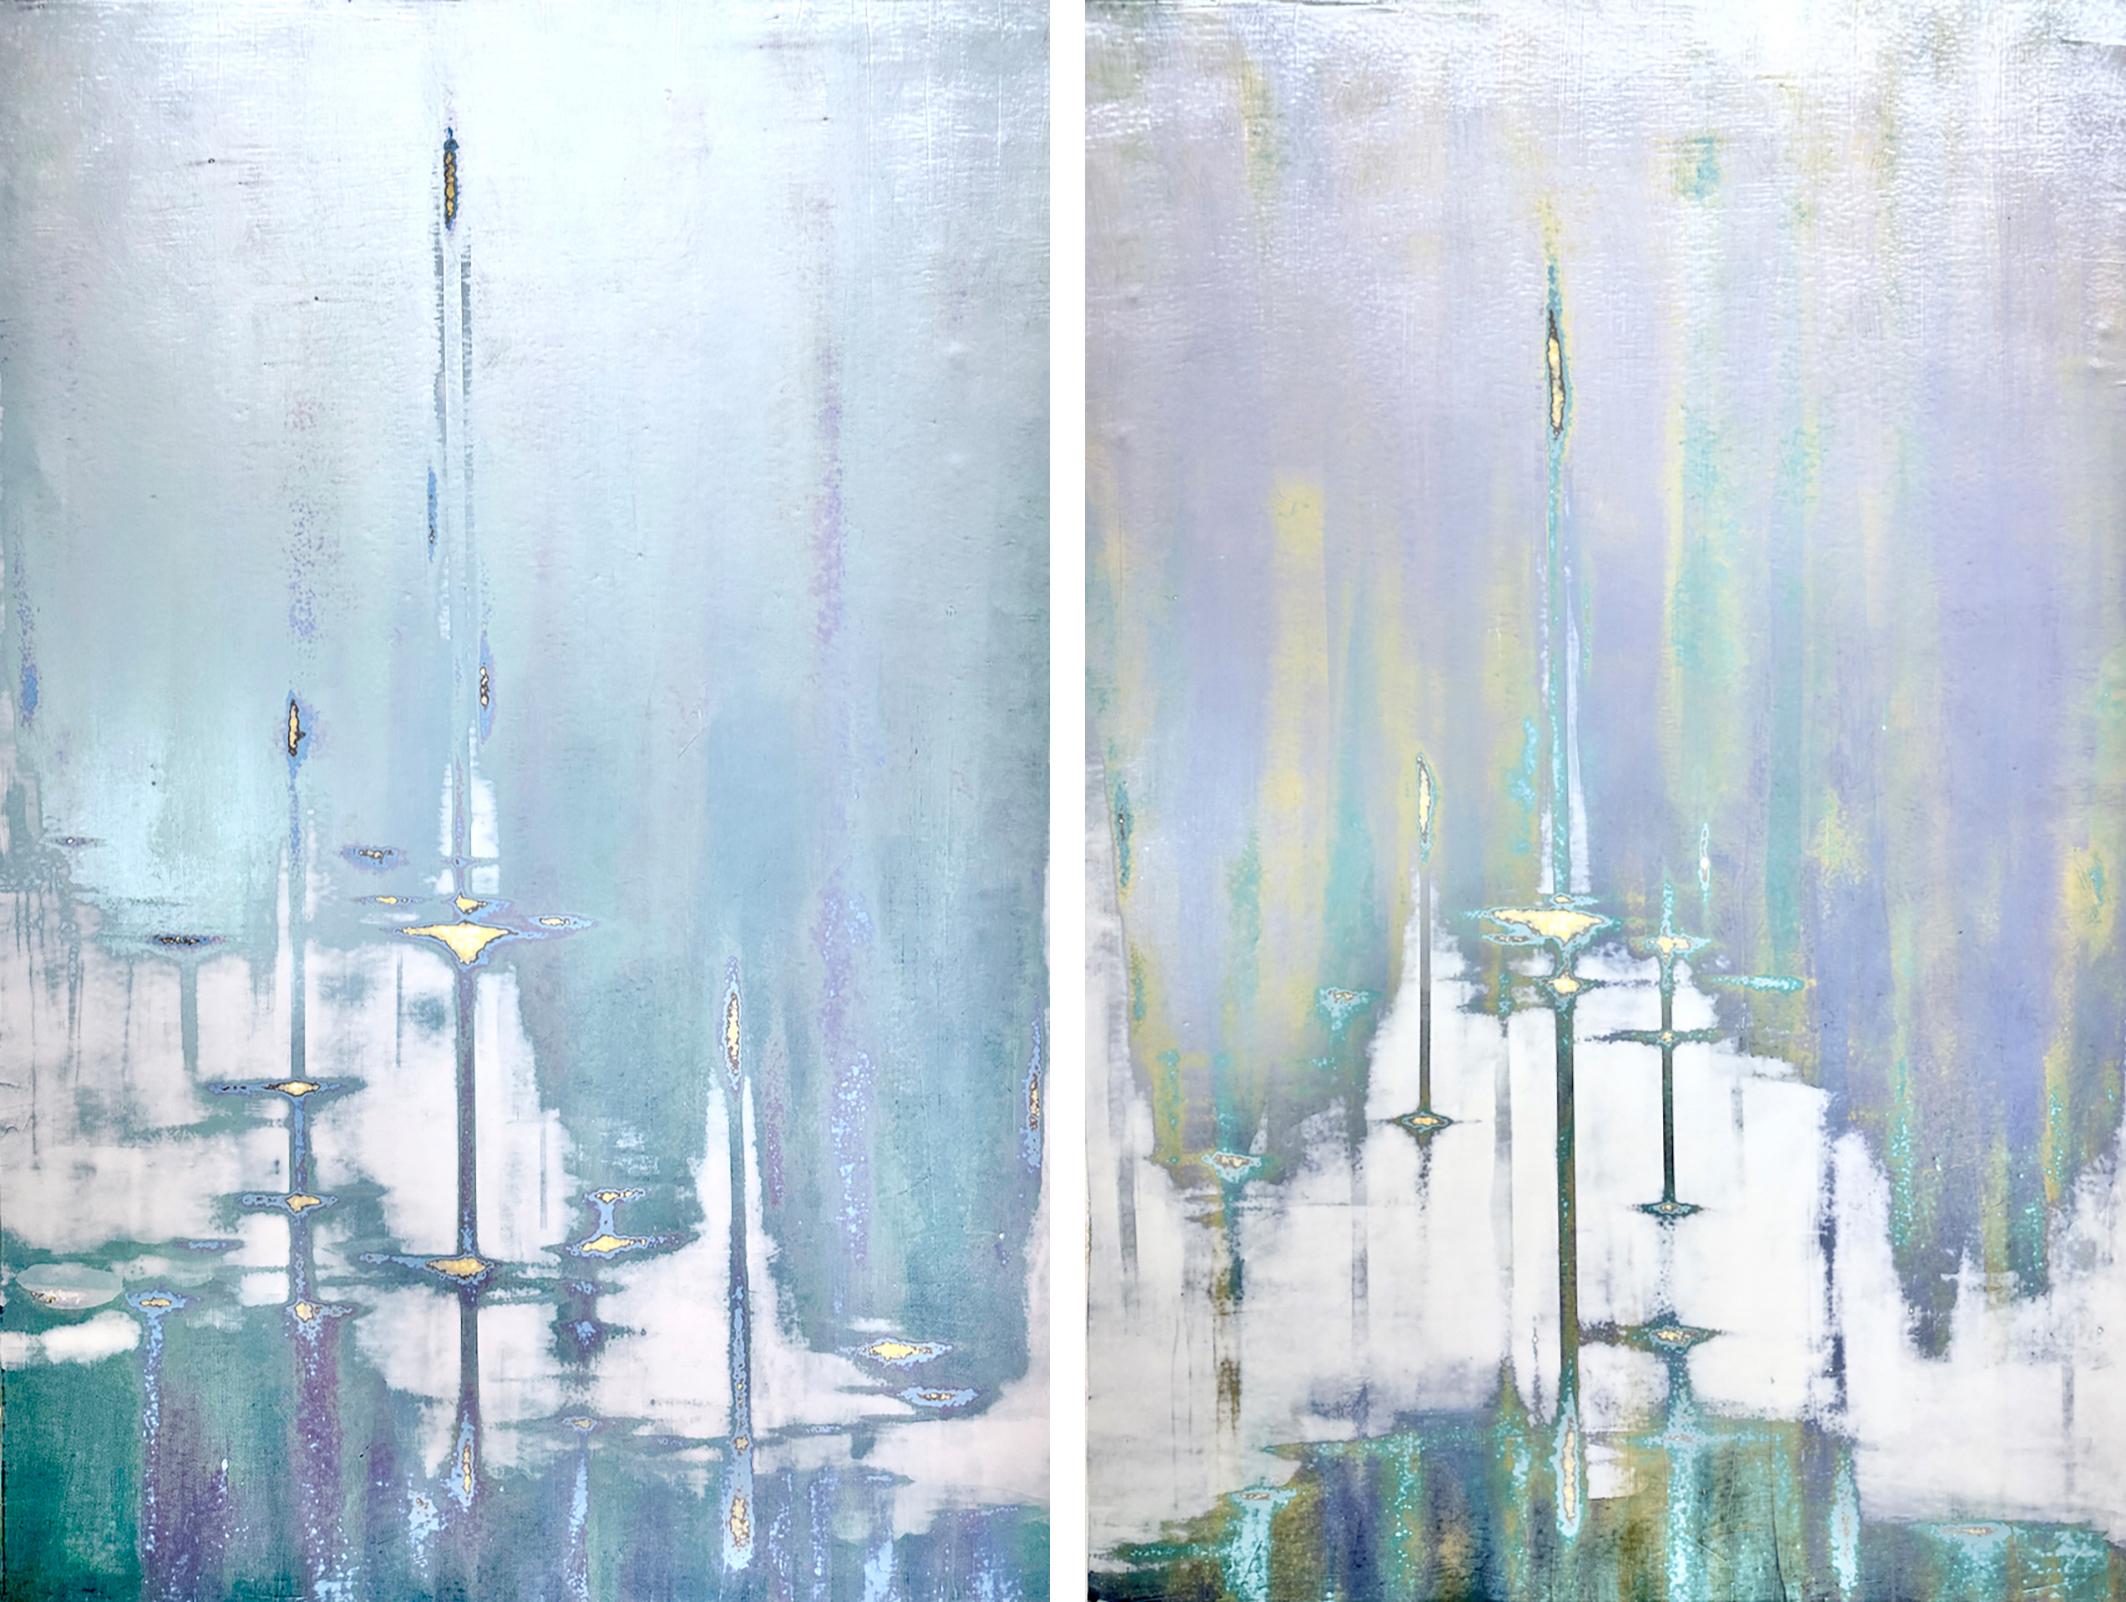 AUDRA WEASER
"Pearl Dives (Diptych)"
Acrylic, Metallic Pigments, Plaster Paint on Canvas
60 x 40 in. Each; 60 x 80 in. Overall
___________________

Utilizing a minimalist color palette, Weaser’s process-based paintings are excavations of memories